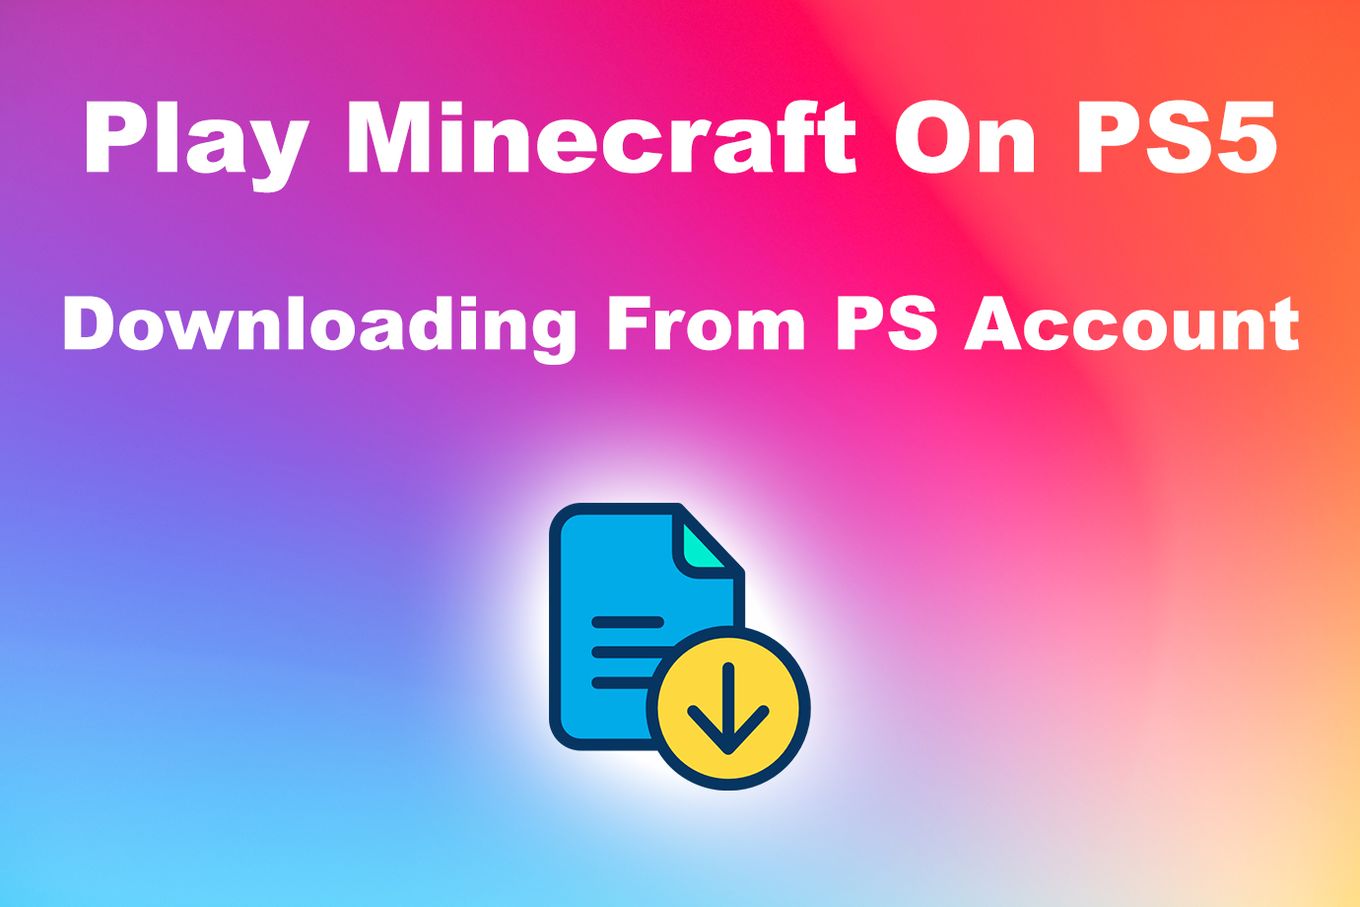 Play Minecraft on PS5 Downloading From PS Account